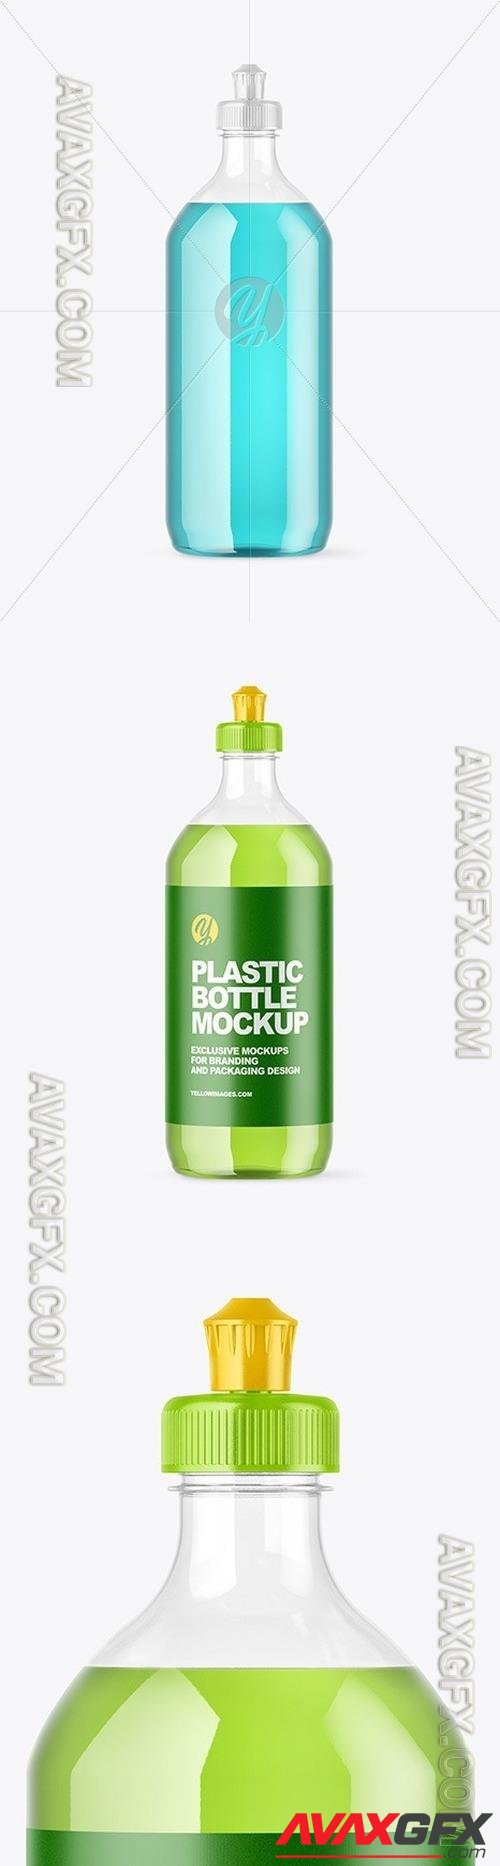 Clear Plastic Bottle with Squeeze Cap Mockup 47605 TIF